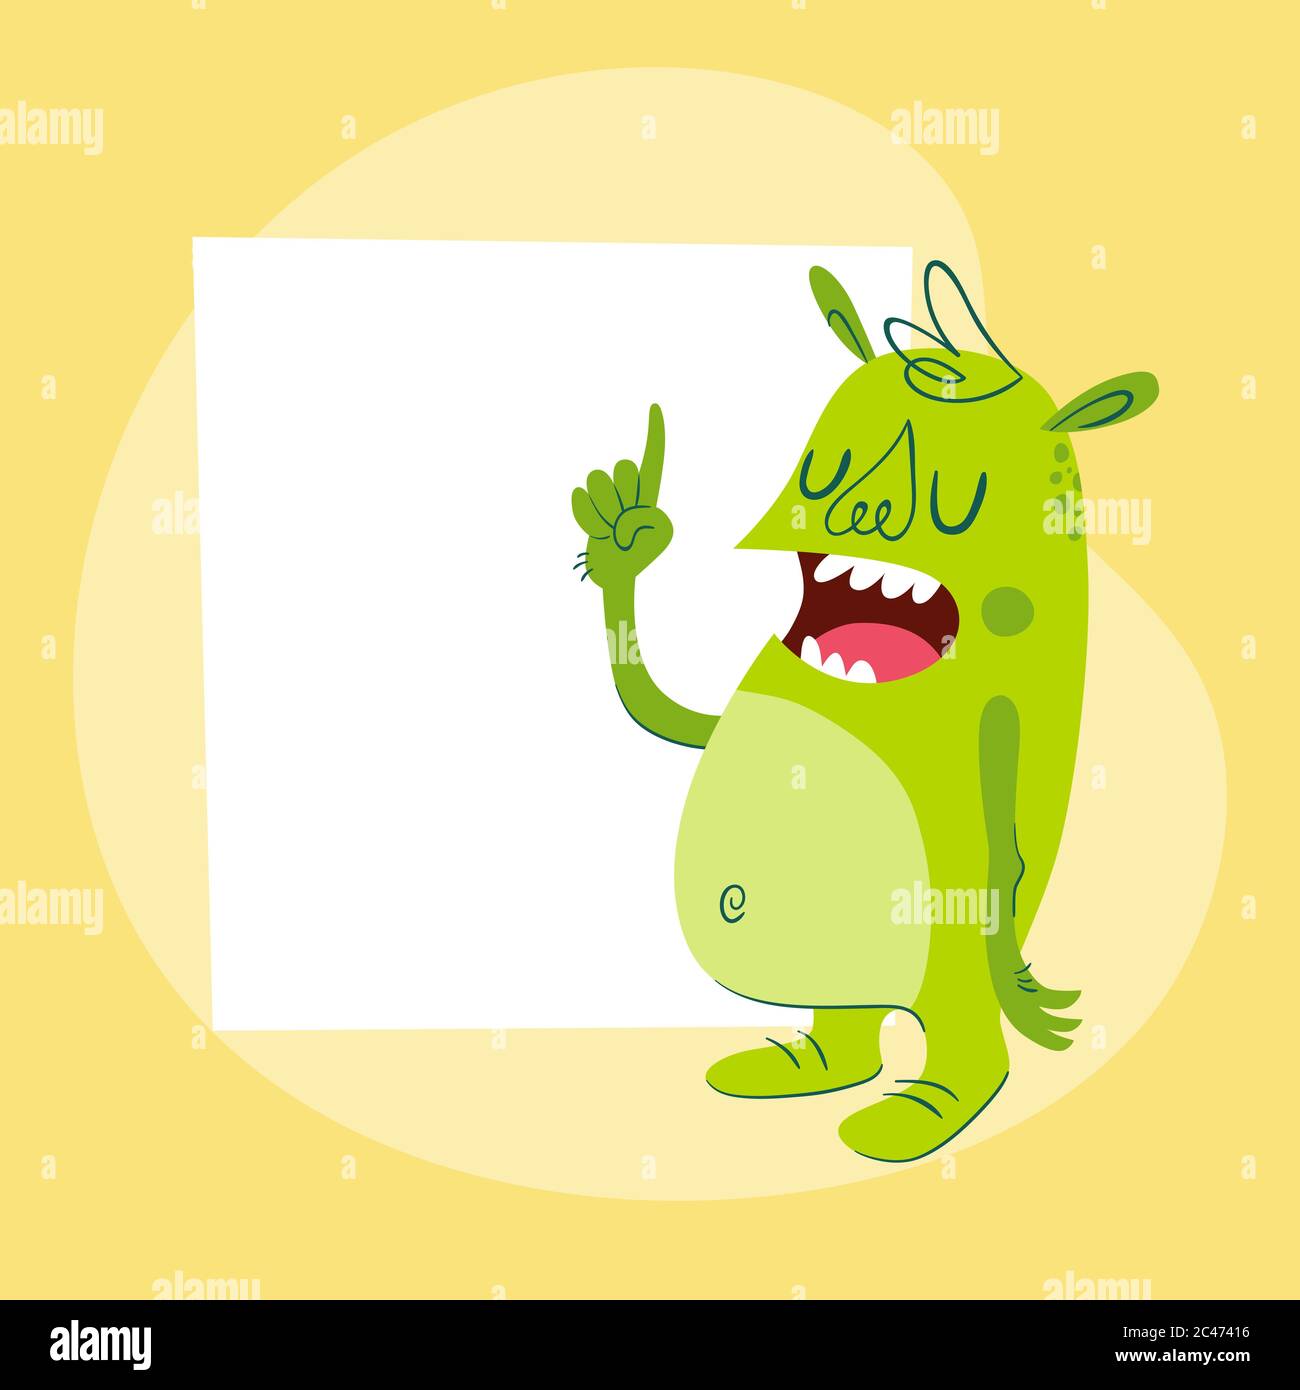 Funny monster with a blank card behind. Retro cartoon style character in green color, is giving a lesson or teaching. Vector illustration, perfect for Stock Vector